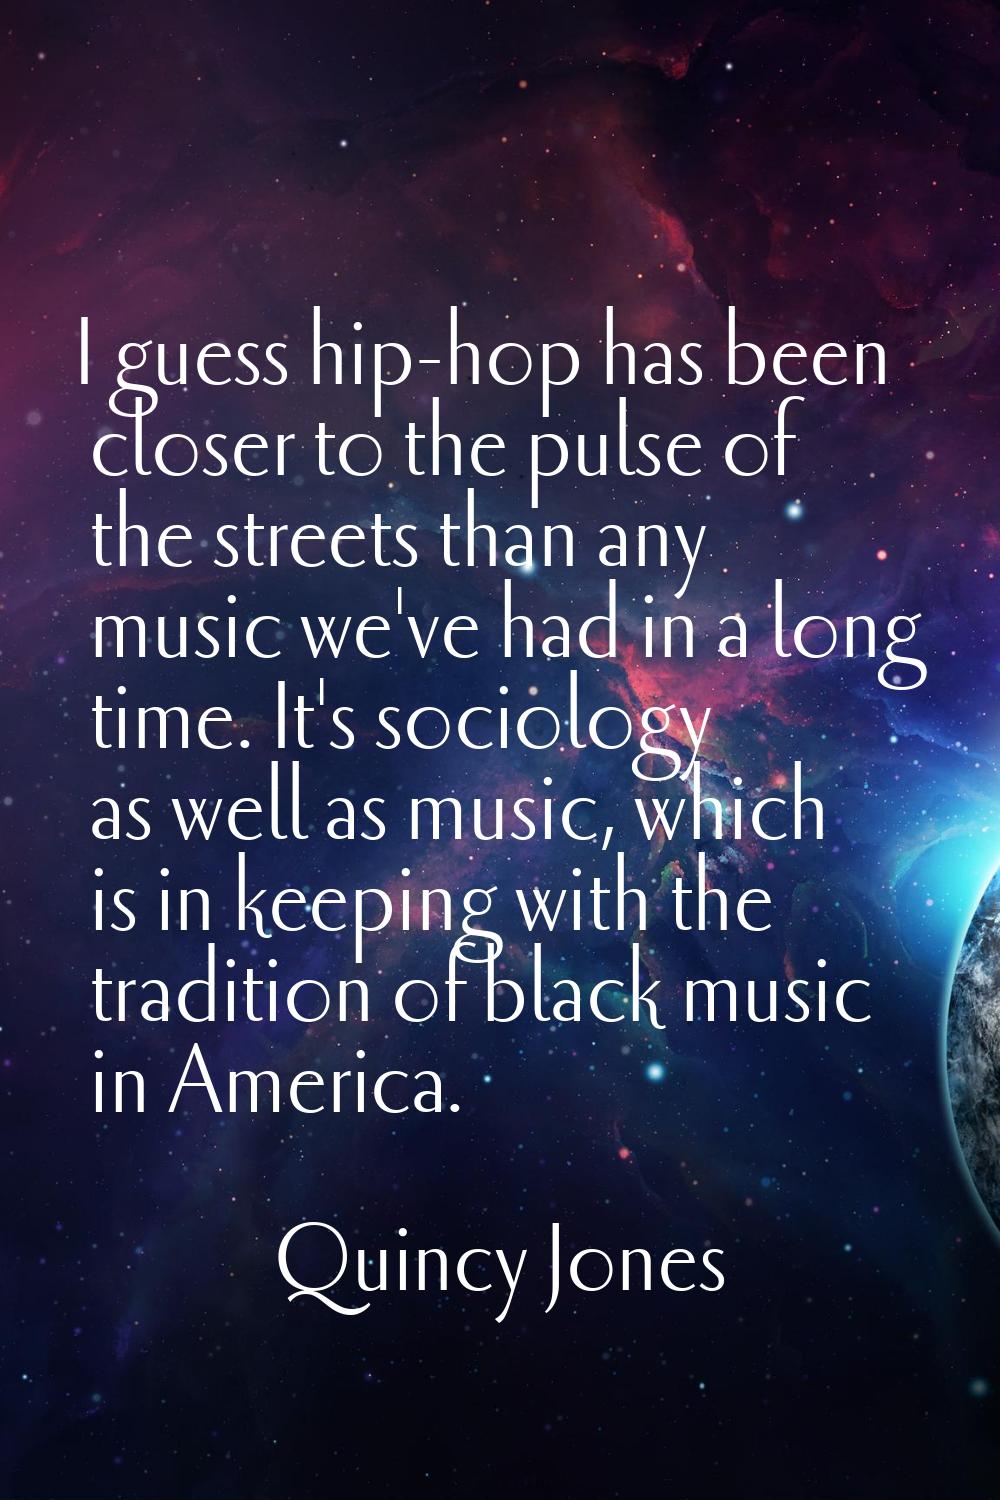 I guess hip-hop has been closer to the pulse of the streets than any music we've had in a long time